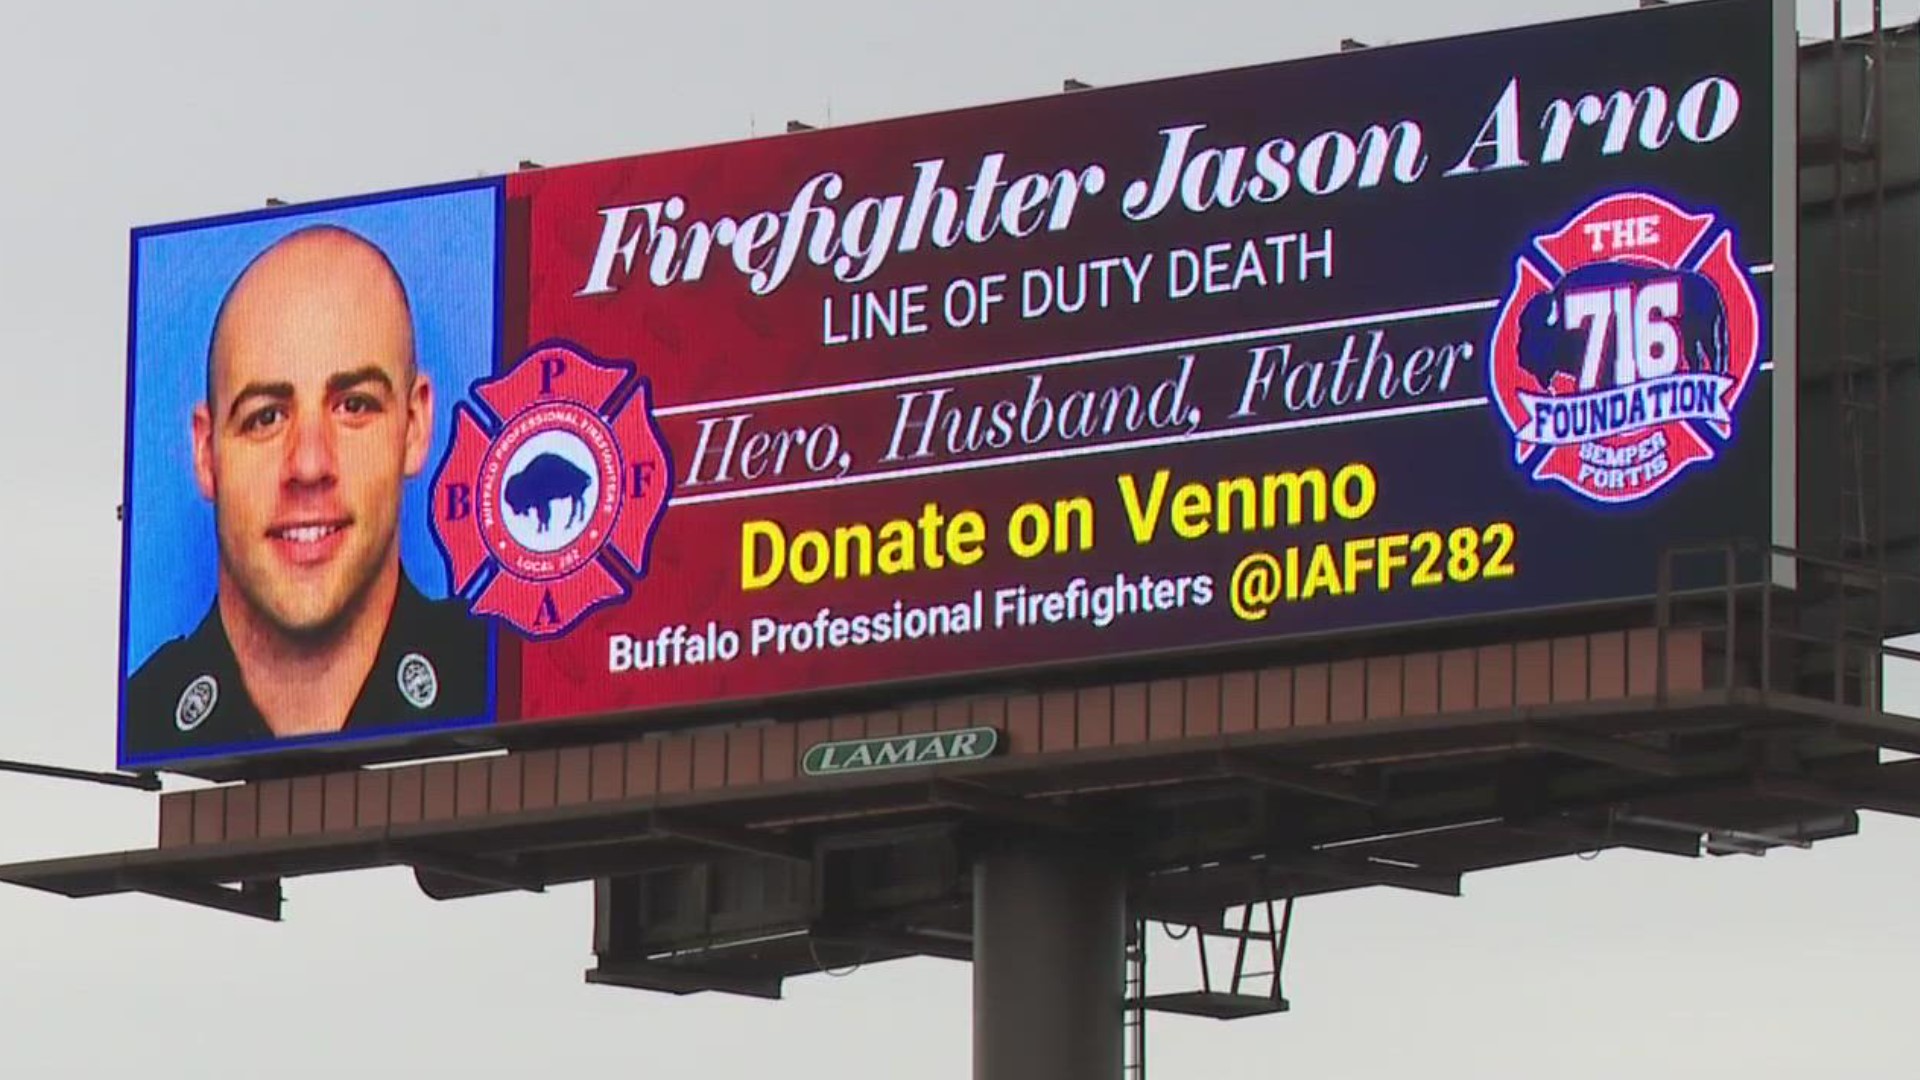 The billboards are on the 190 and the 33.
Here's the info if you want to help. you can Venmo donations to @IAFF282.